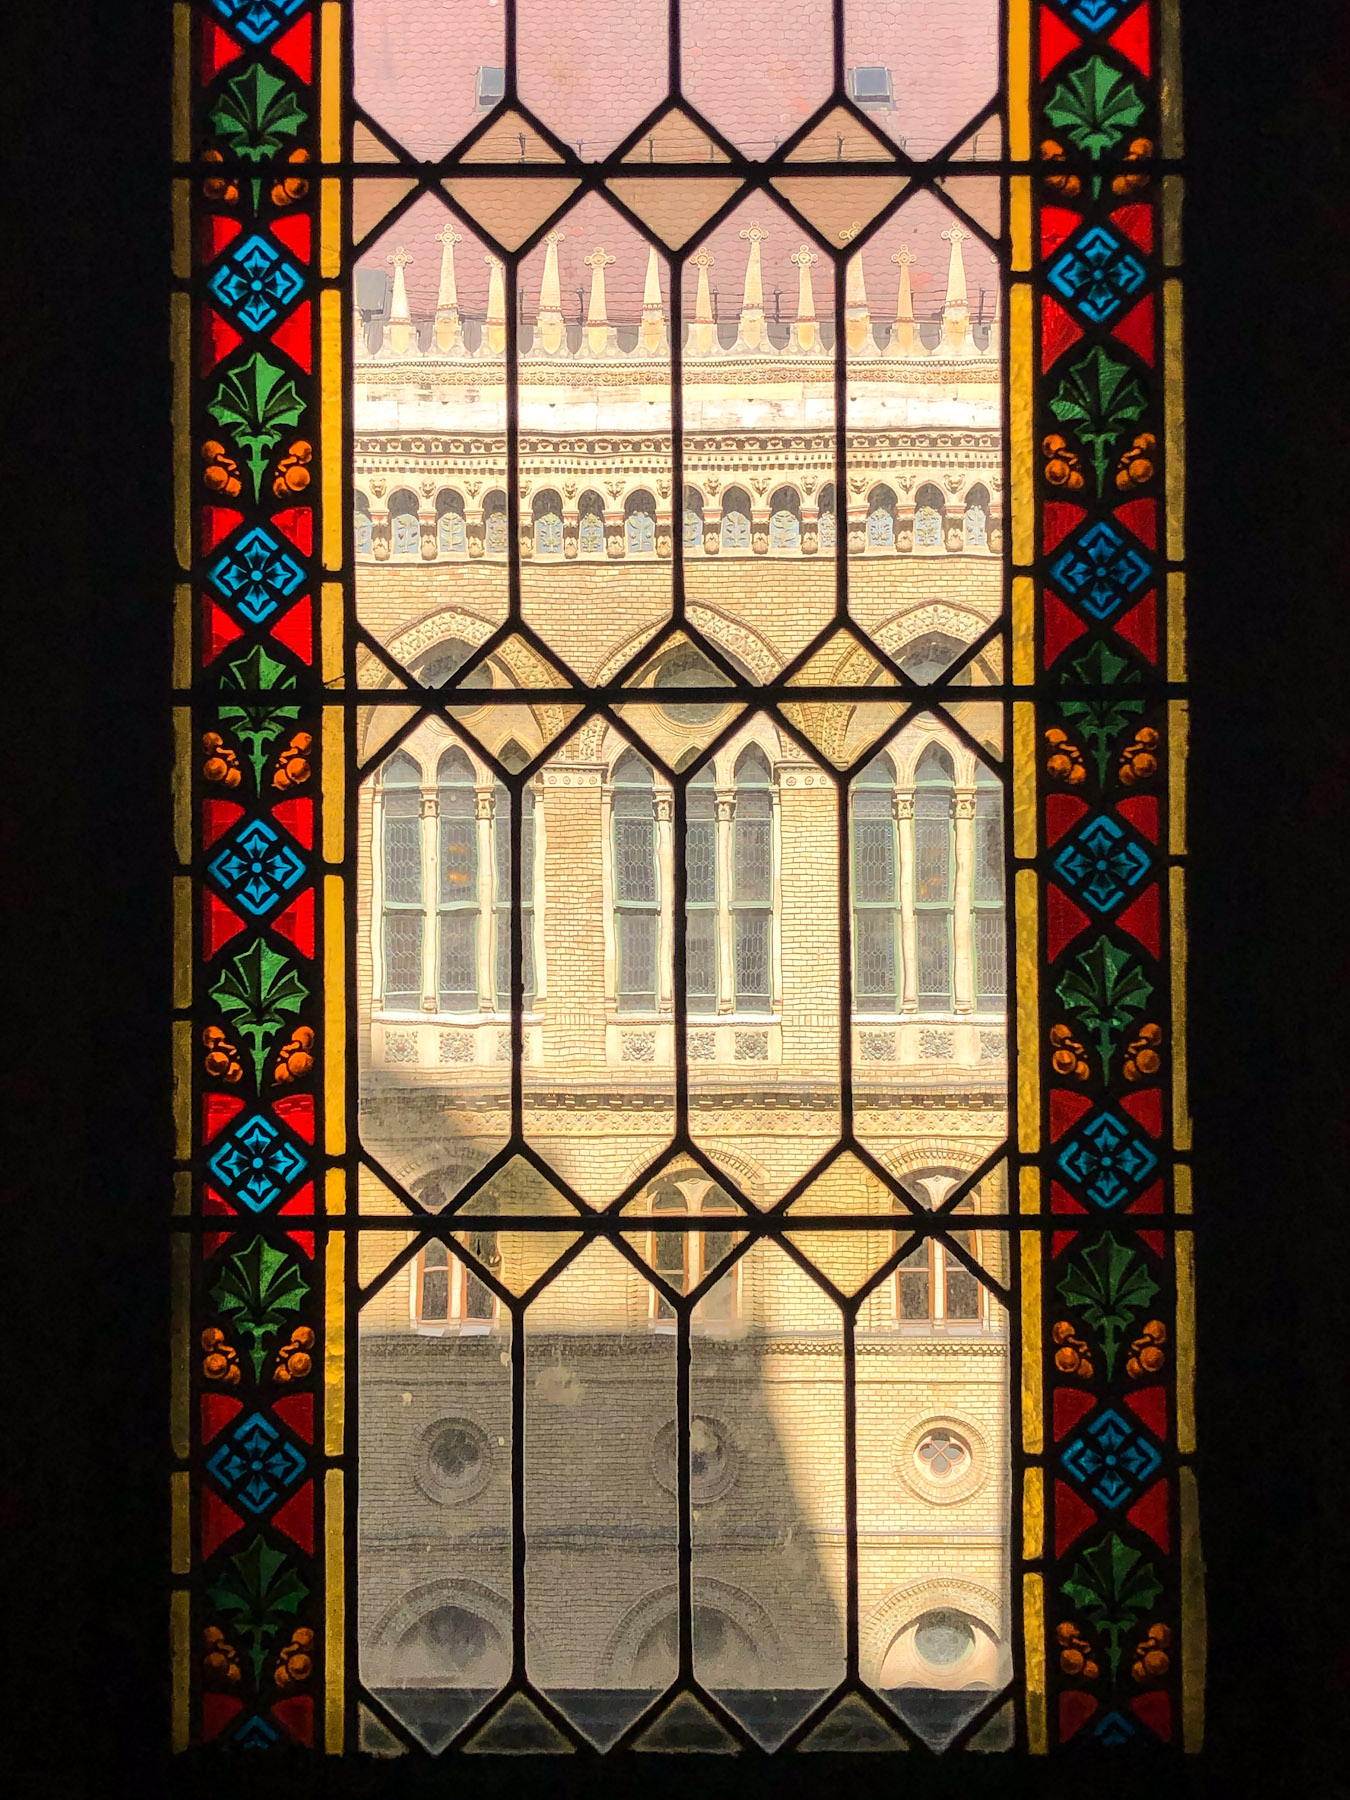 Stained Glass, Hungarian Parliament Building, Budapest